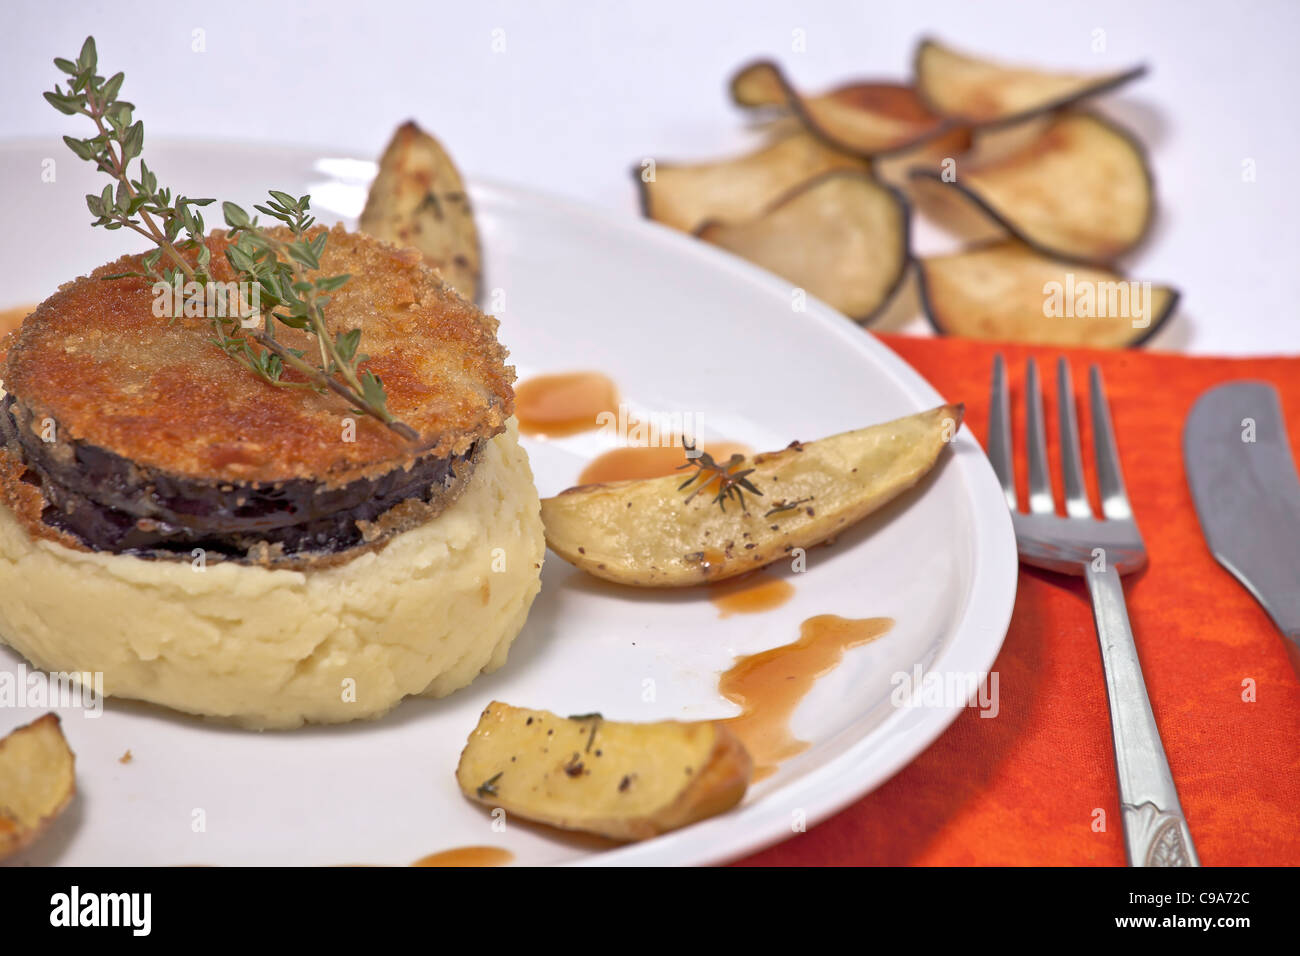 Eggplant Cordon Bleu stuffed with Swiss cheese and red pesto, served with mashed potatoes and thyme  Stock Photo